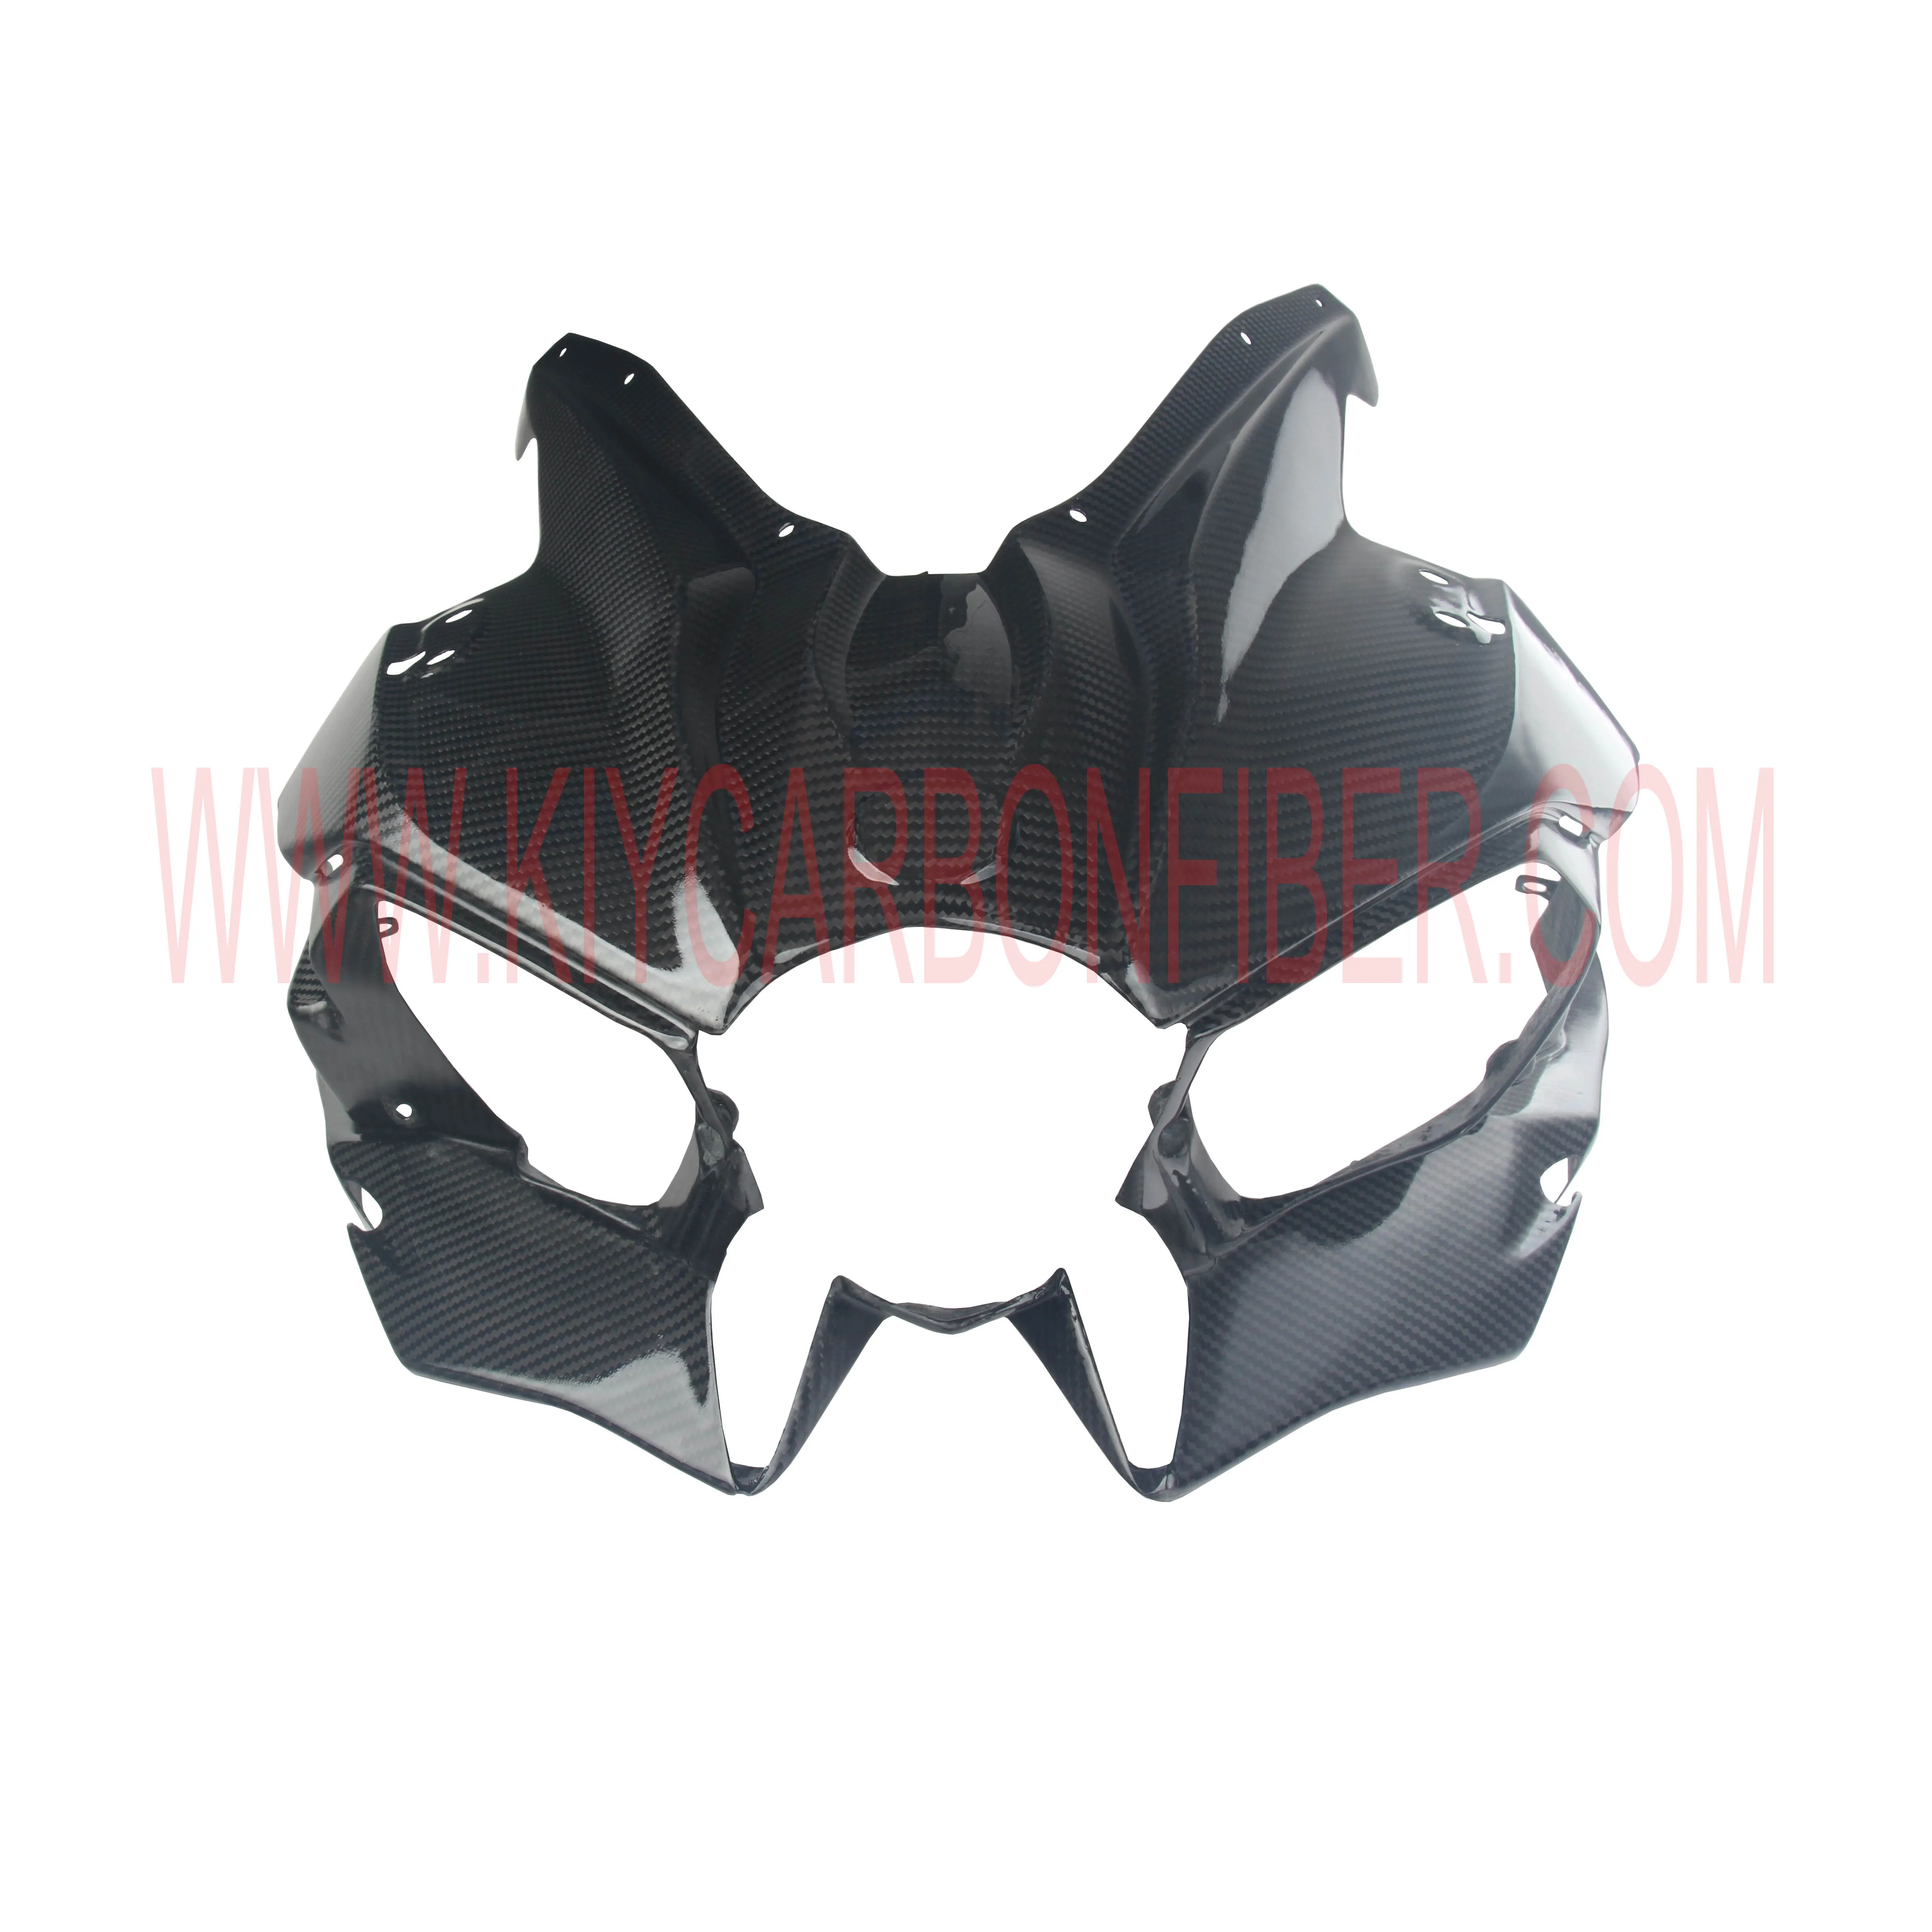 Carbon Fiber Motorcycle Part Front Fairing Nose Fairing Nose Cowl For Ninja H2 H2r - Buy Carbon Fiber Body Parts Nose Fairing,Motorcycle Part Nose Cowl,For Kawasaki Ninja H2 H2r Product on